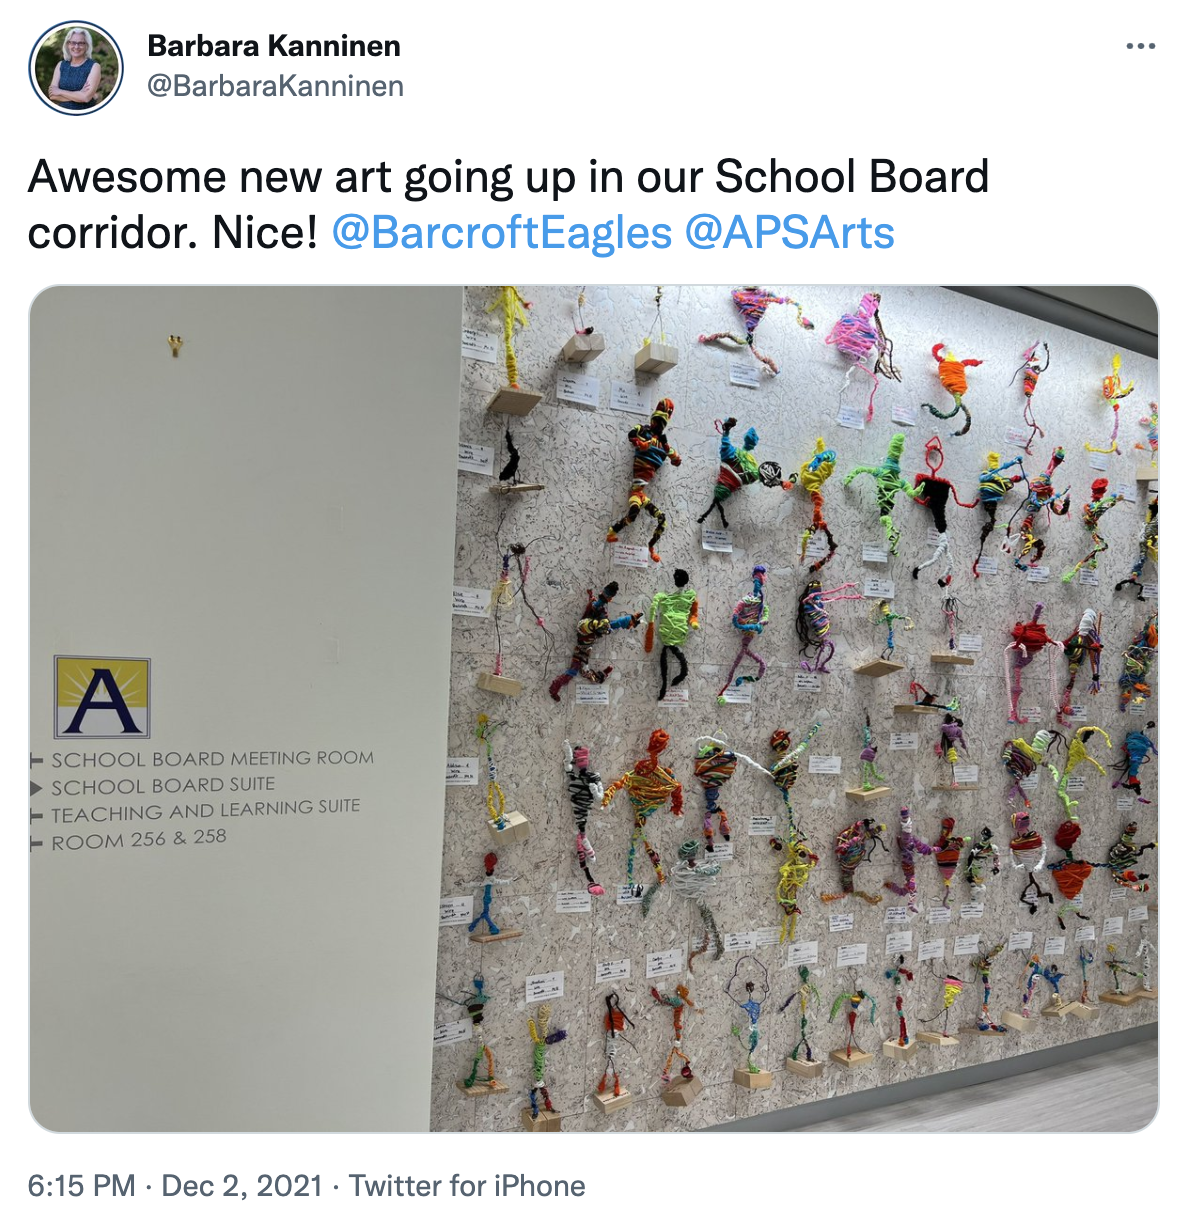 A tweet that reads "Awesome new art going up in our School Board corridor. Nice!"